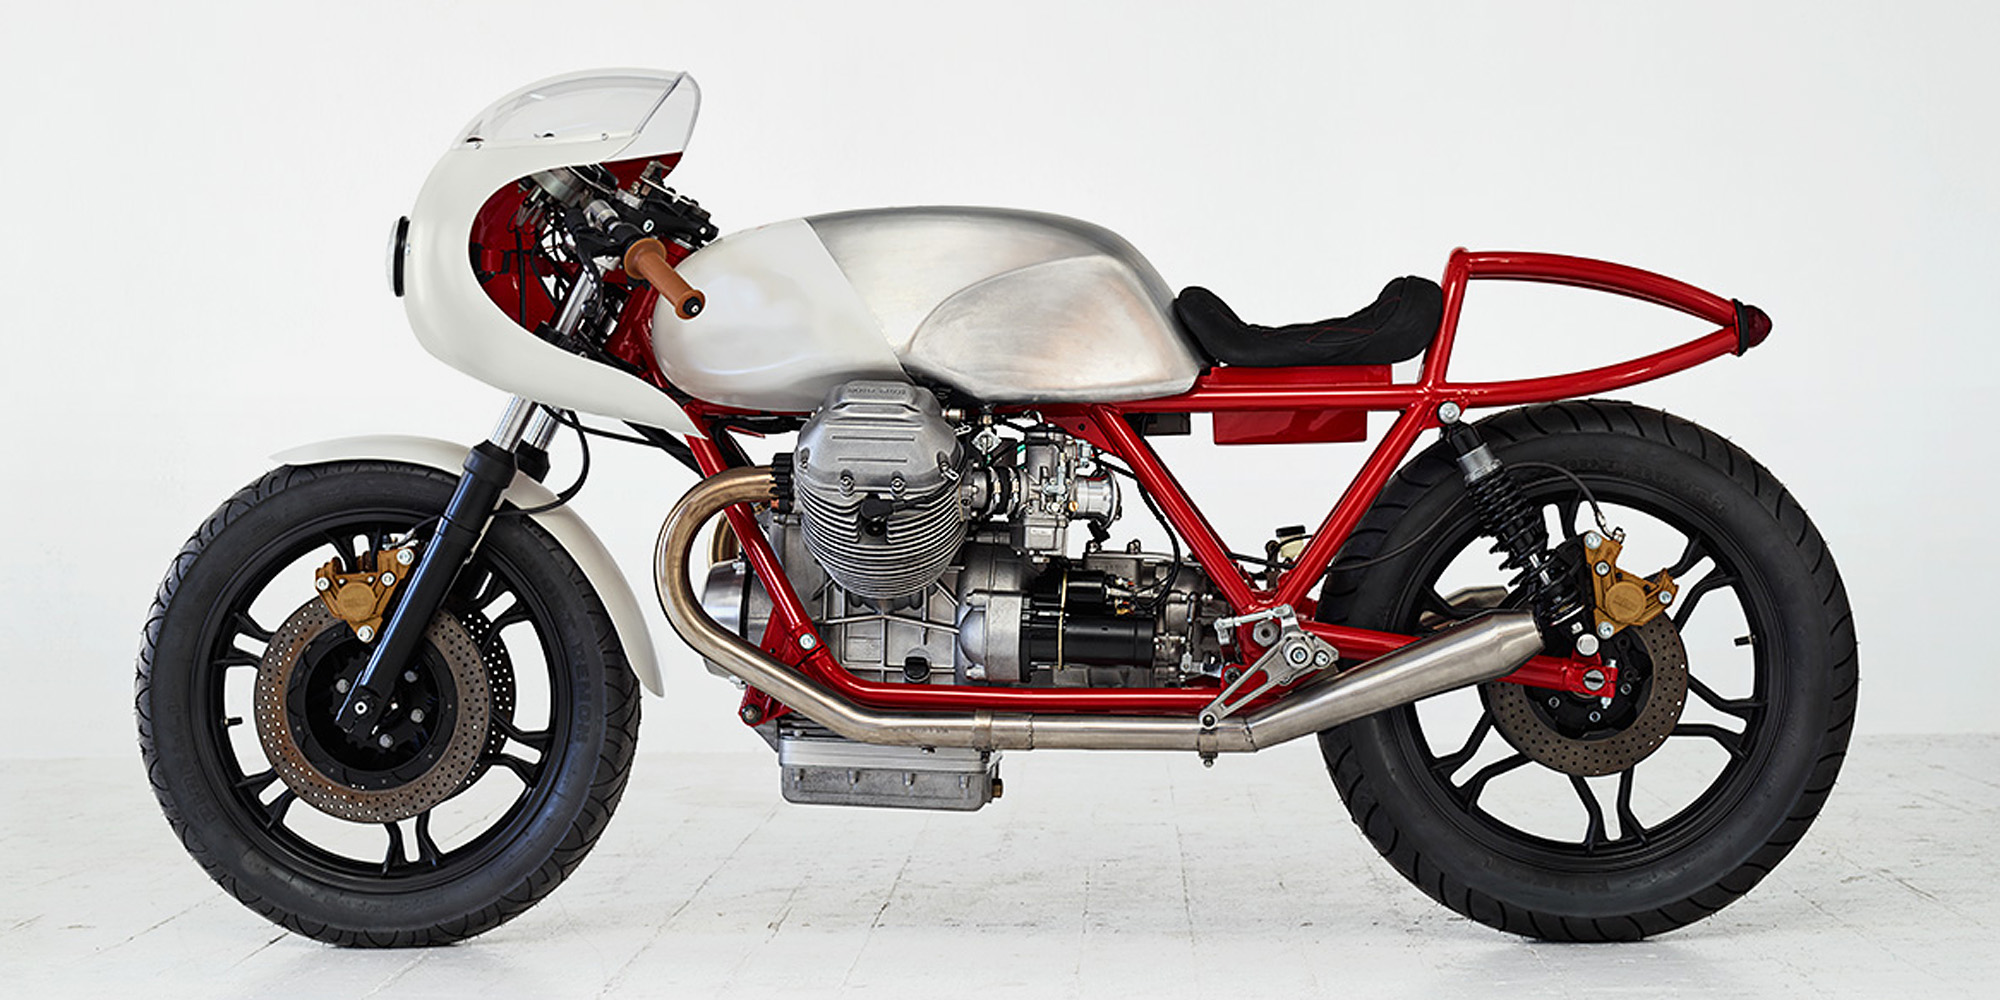 The Moto Guzzi Airtail Motorcycle By Death Machines Of London